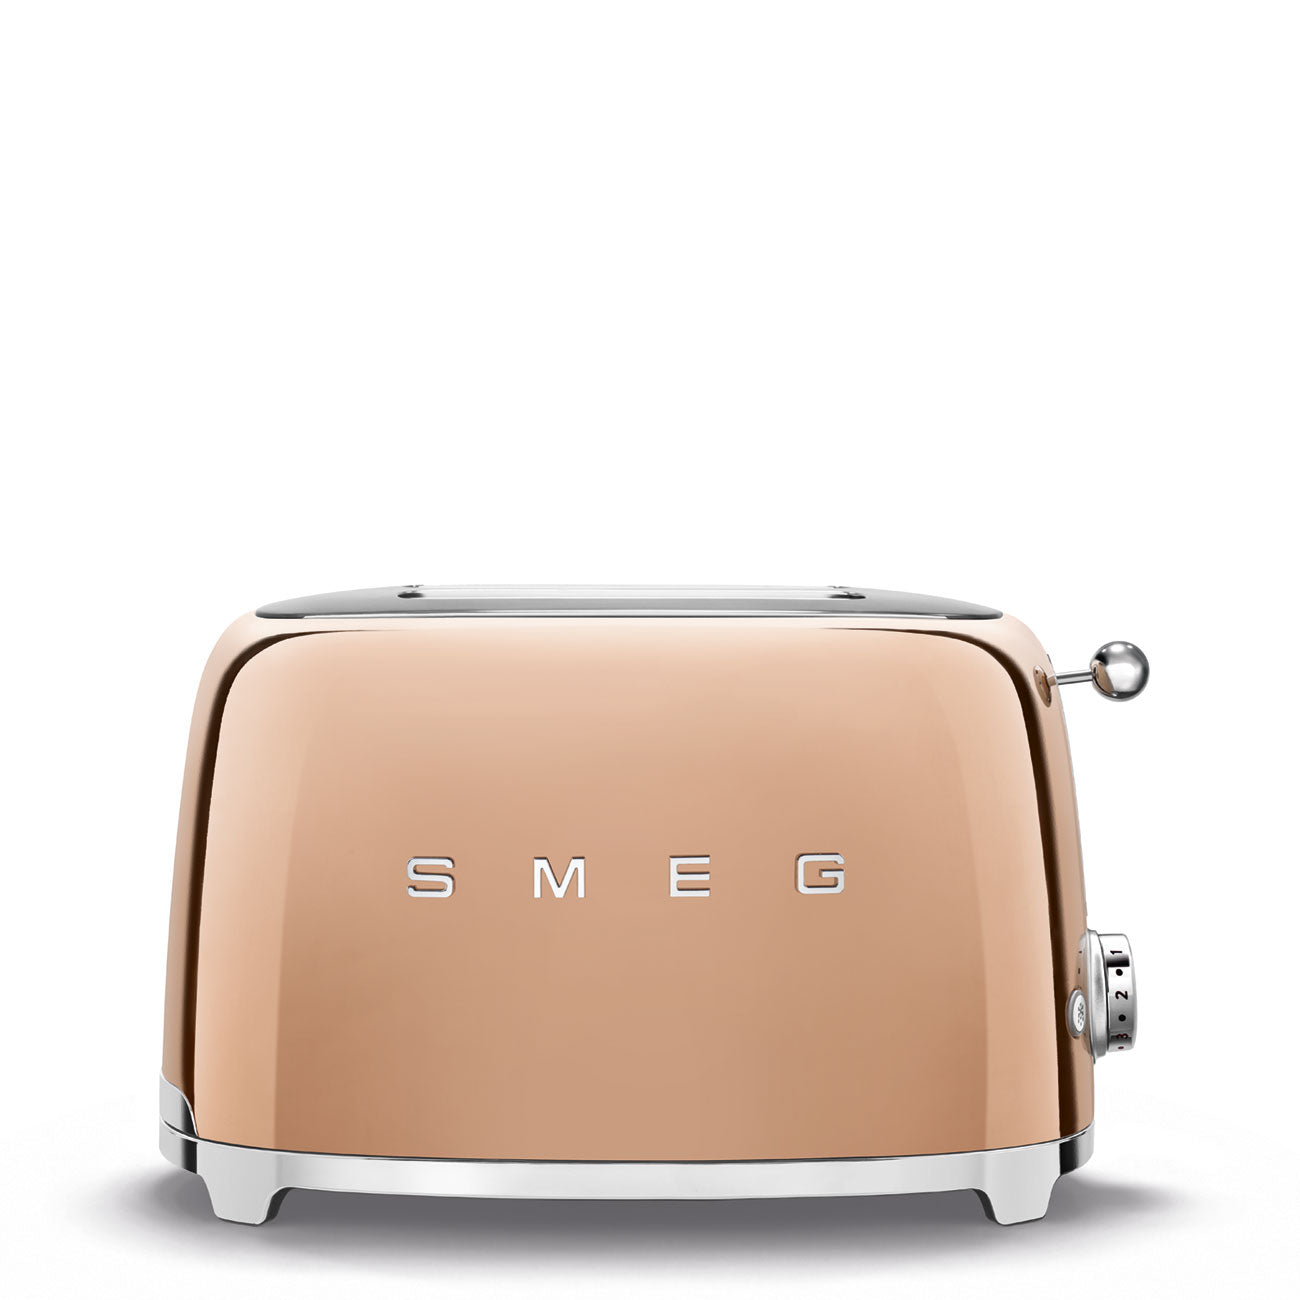 Grille-pain Deluxe 2 tranches Rose - Smeg